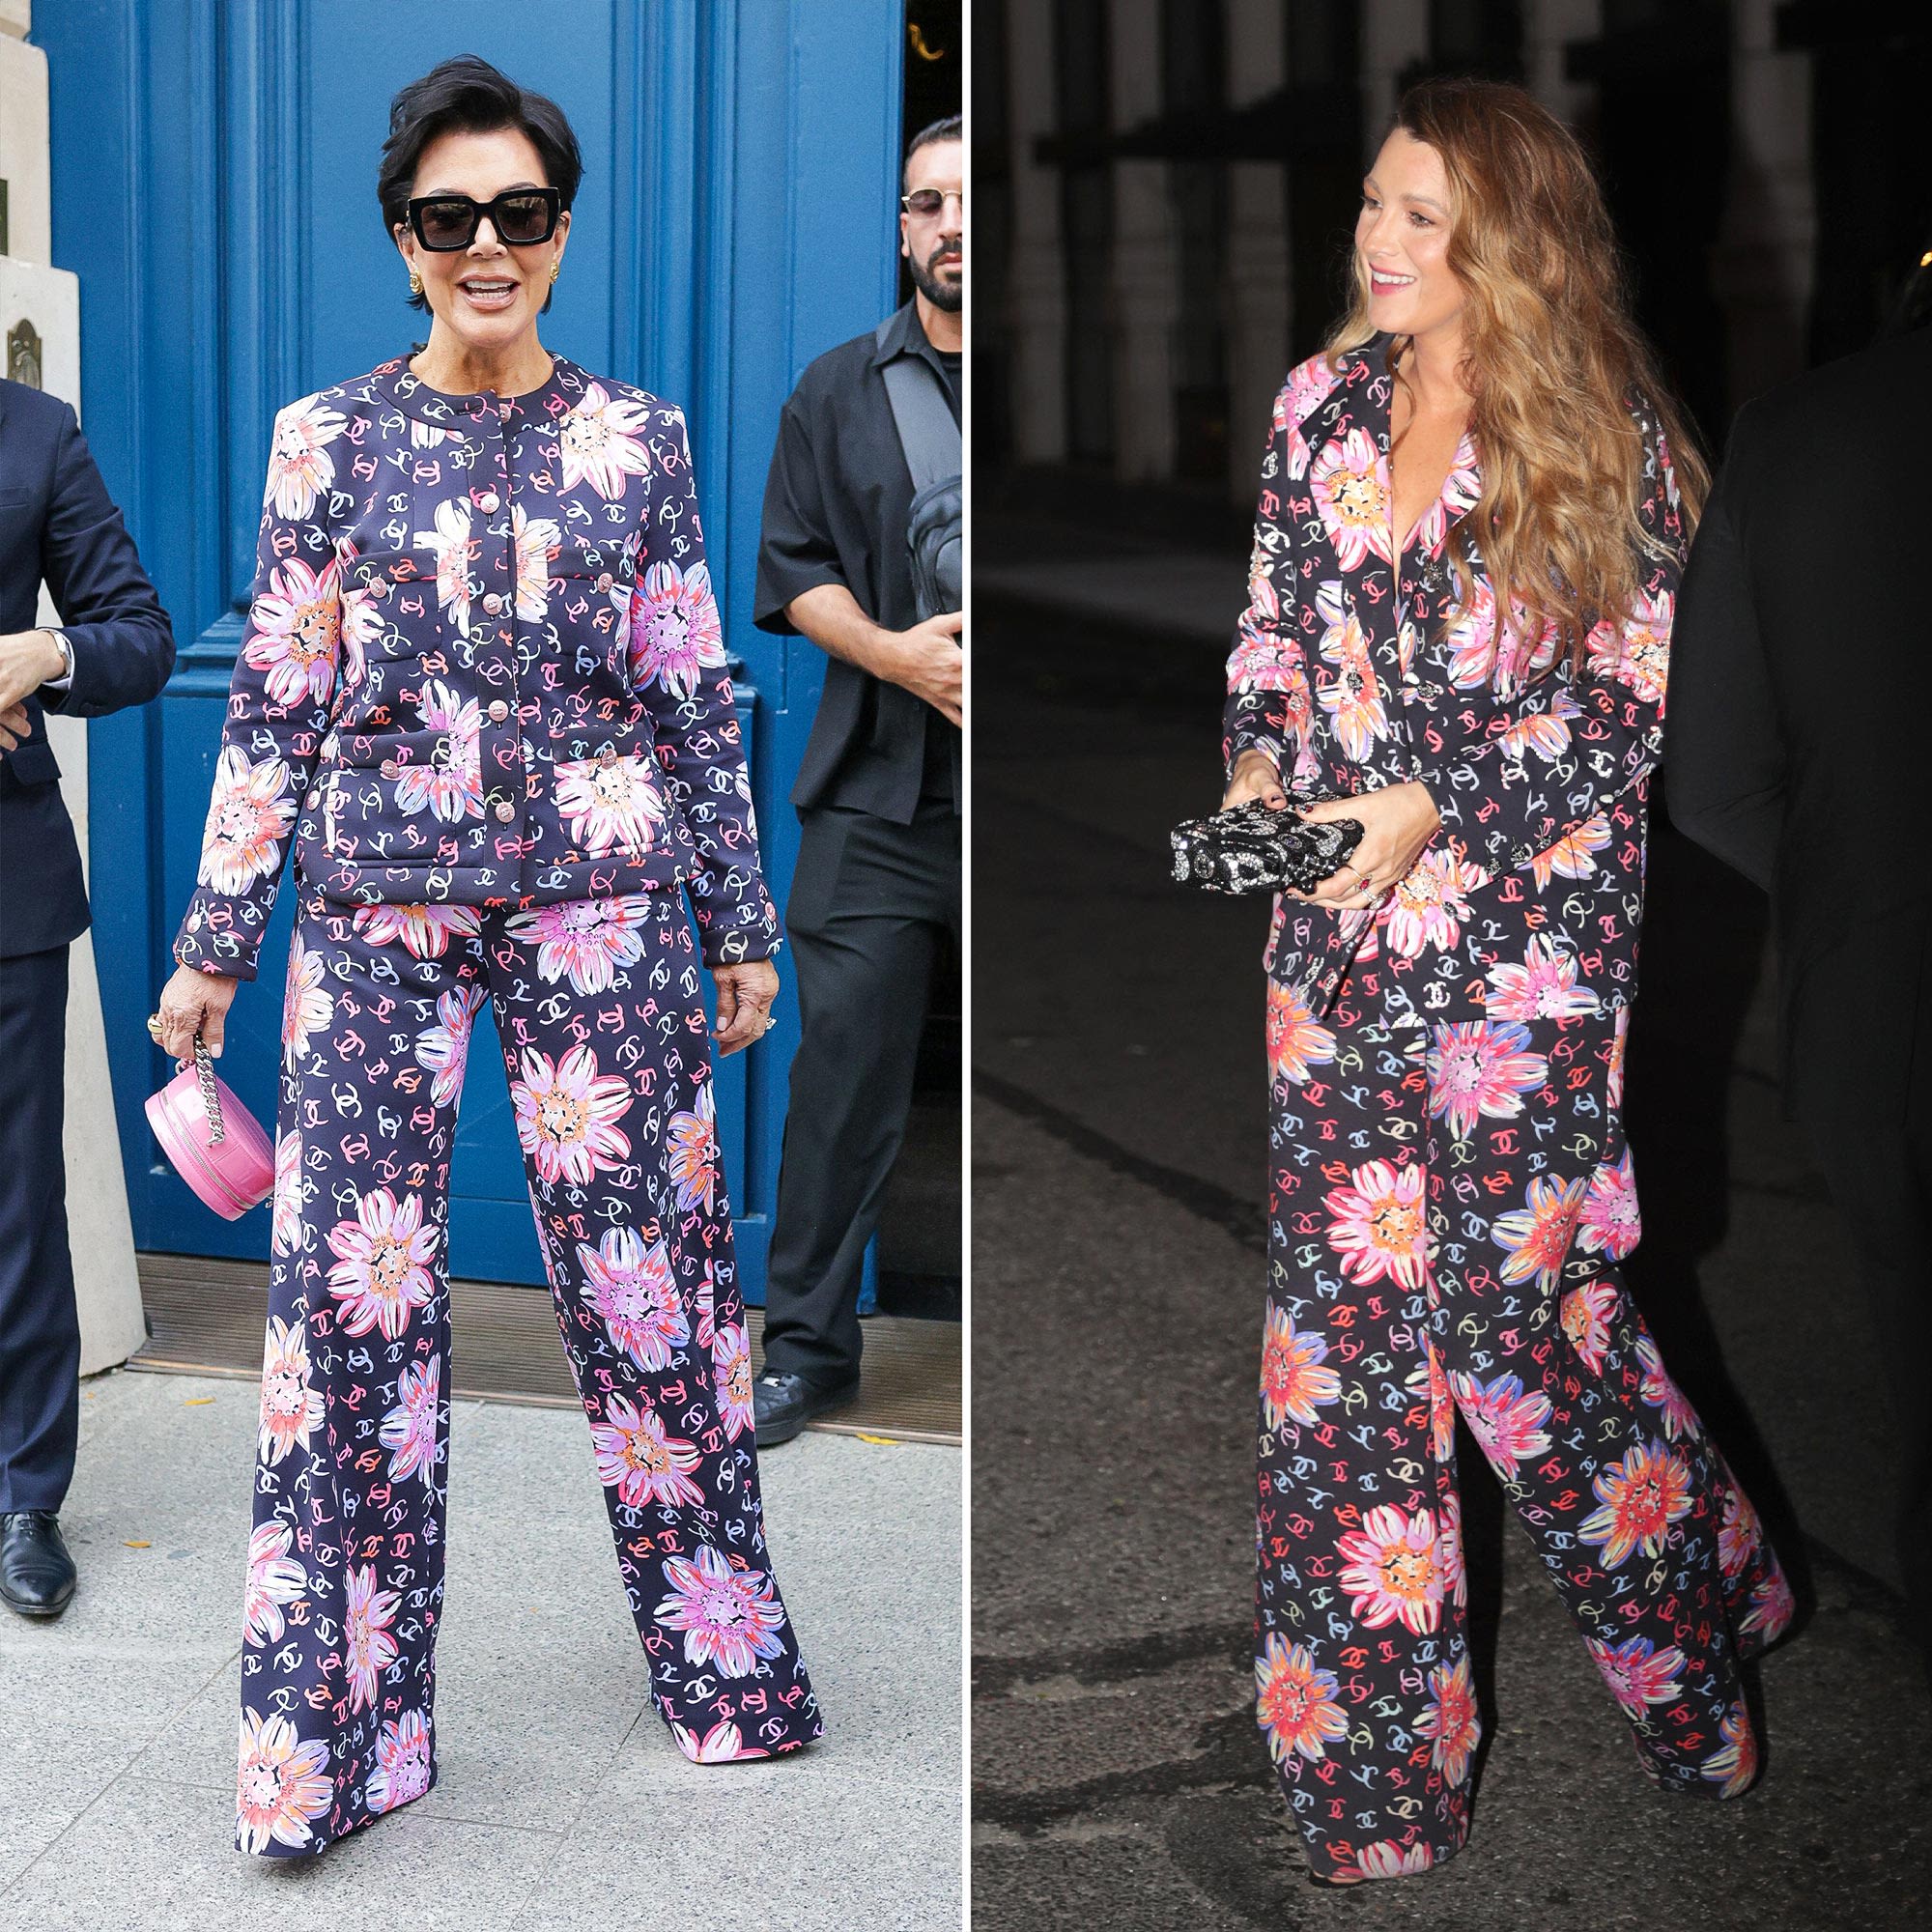 Kris Jenner Rocks the Exact Chanel Floral Suit Blake Lively Just Wore